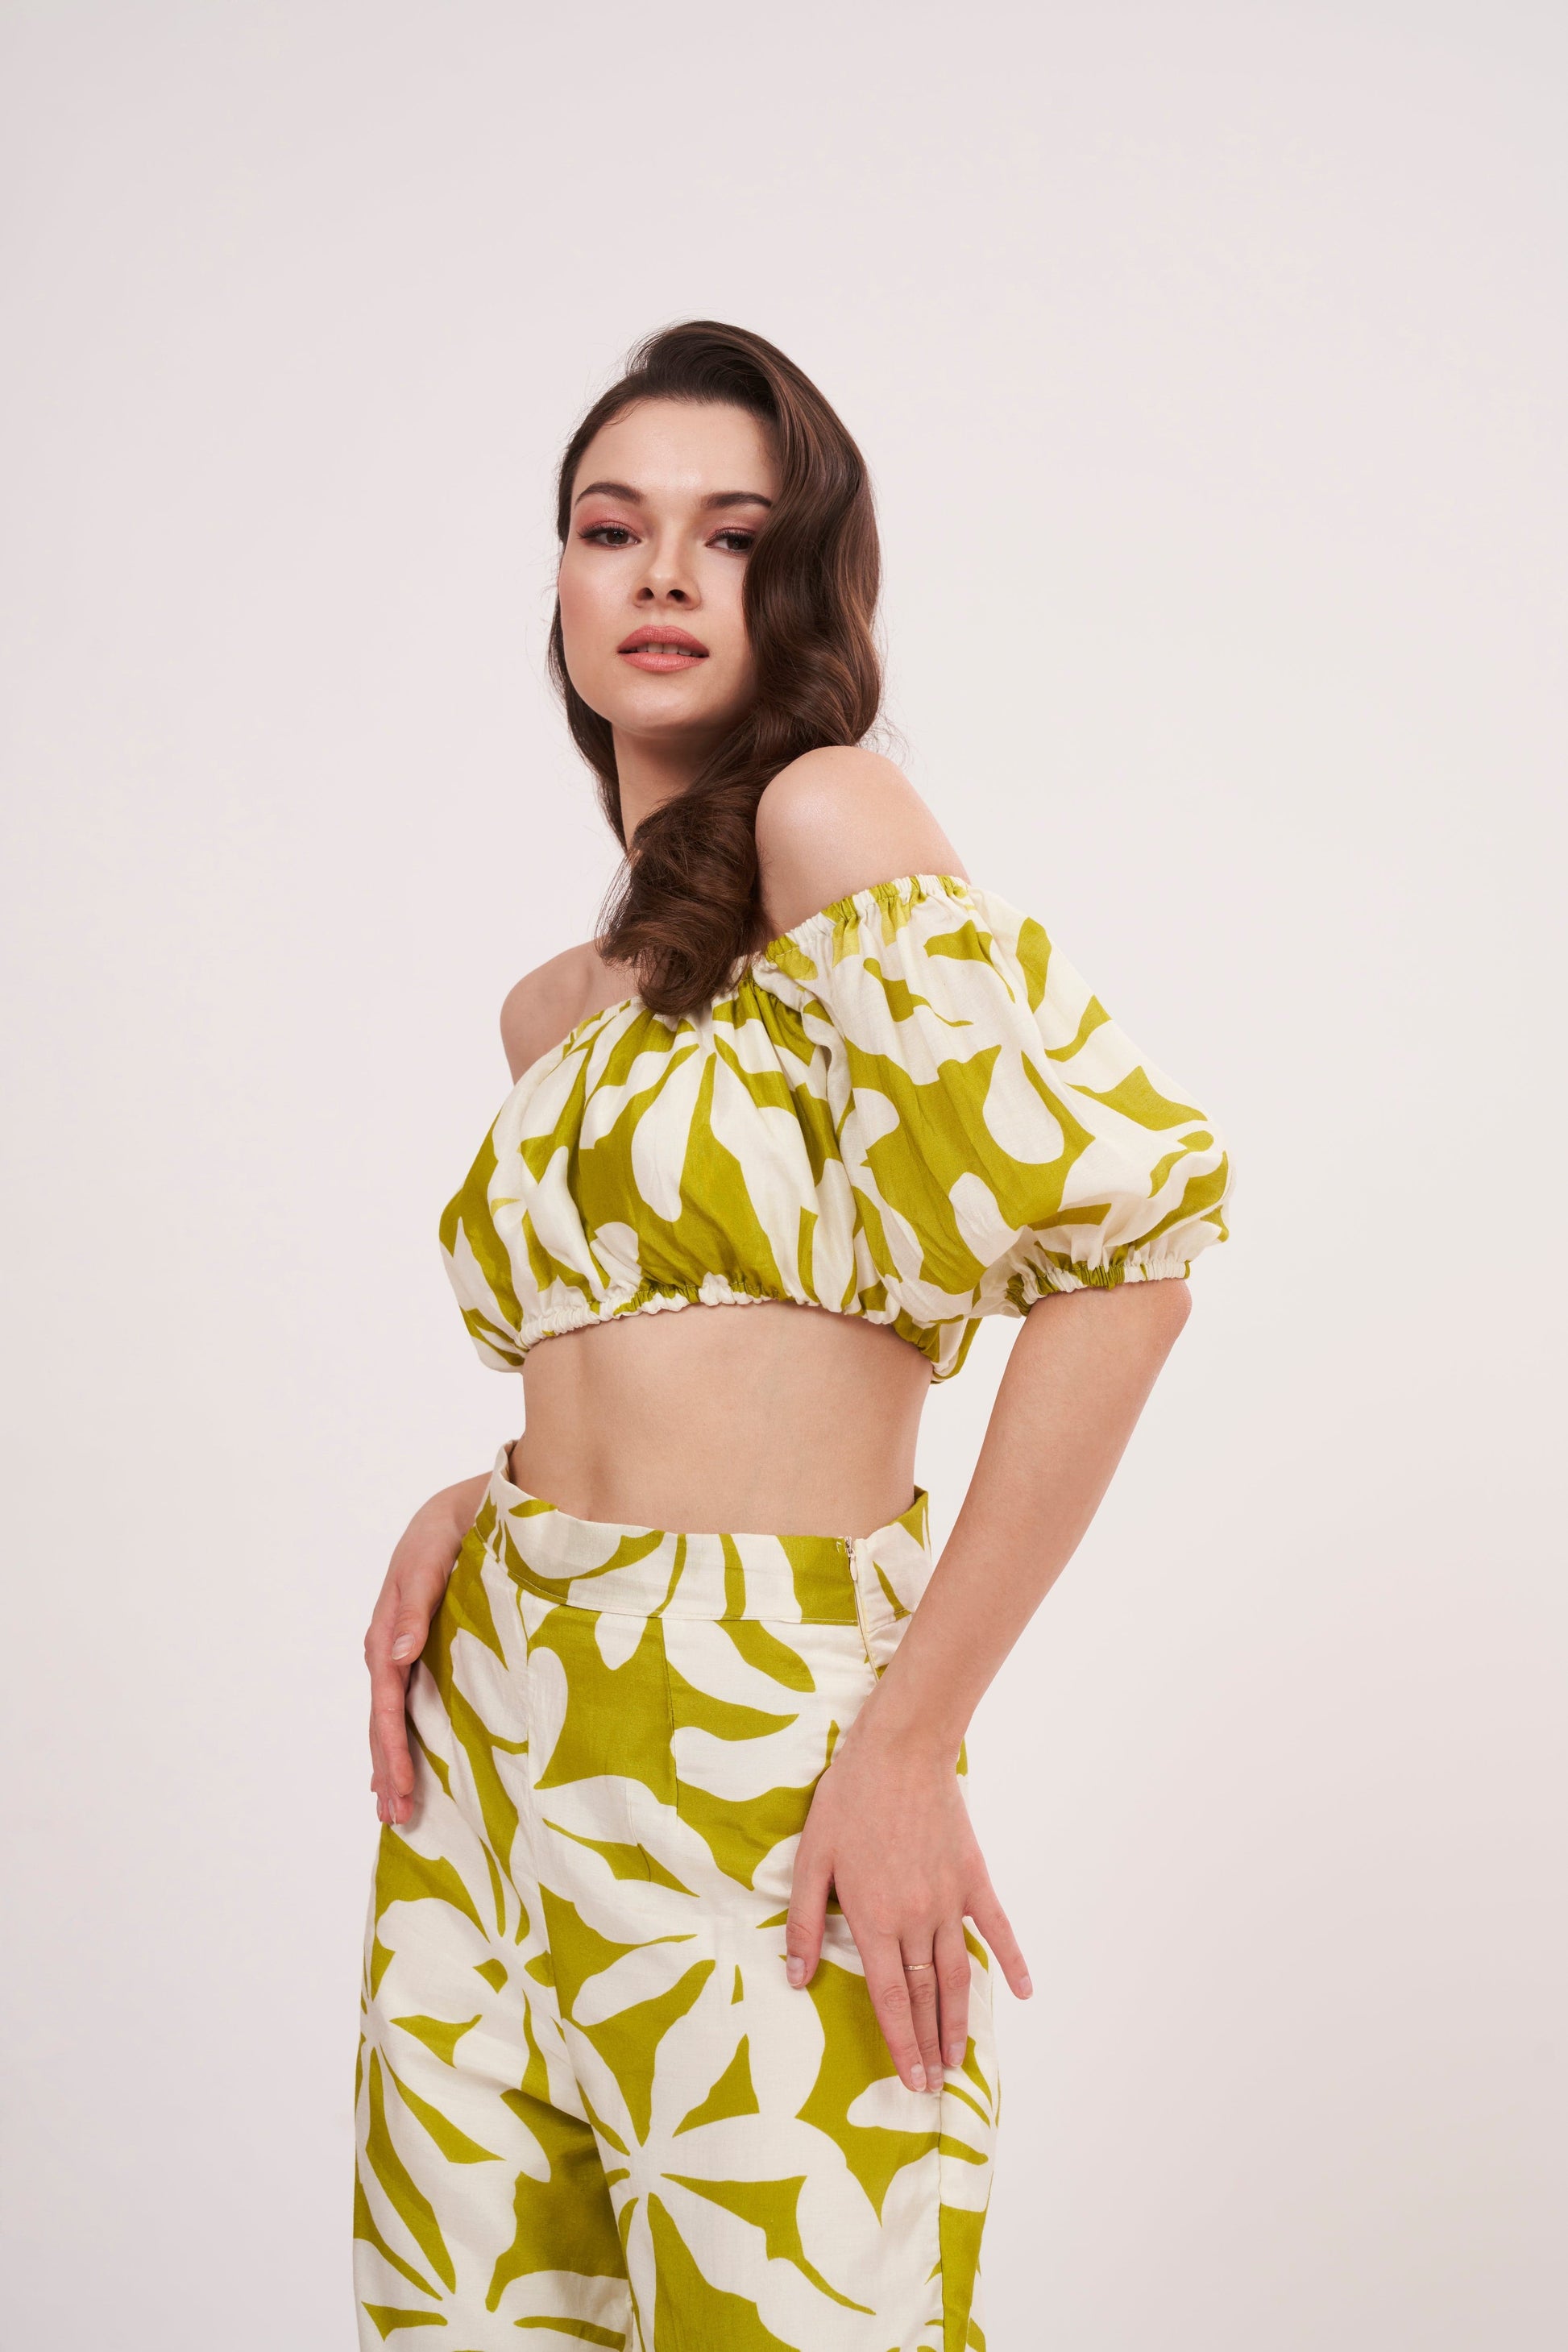 Elasticated-sleeve tube crop top with off-shoulder floral design, perfect for summer outings and casual evening dinners, featuring a green geometric print.